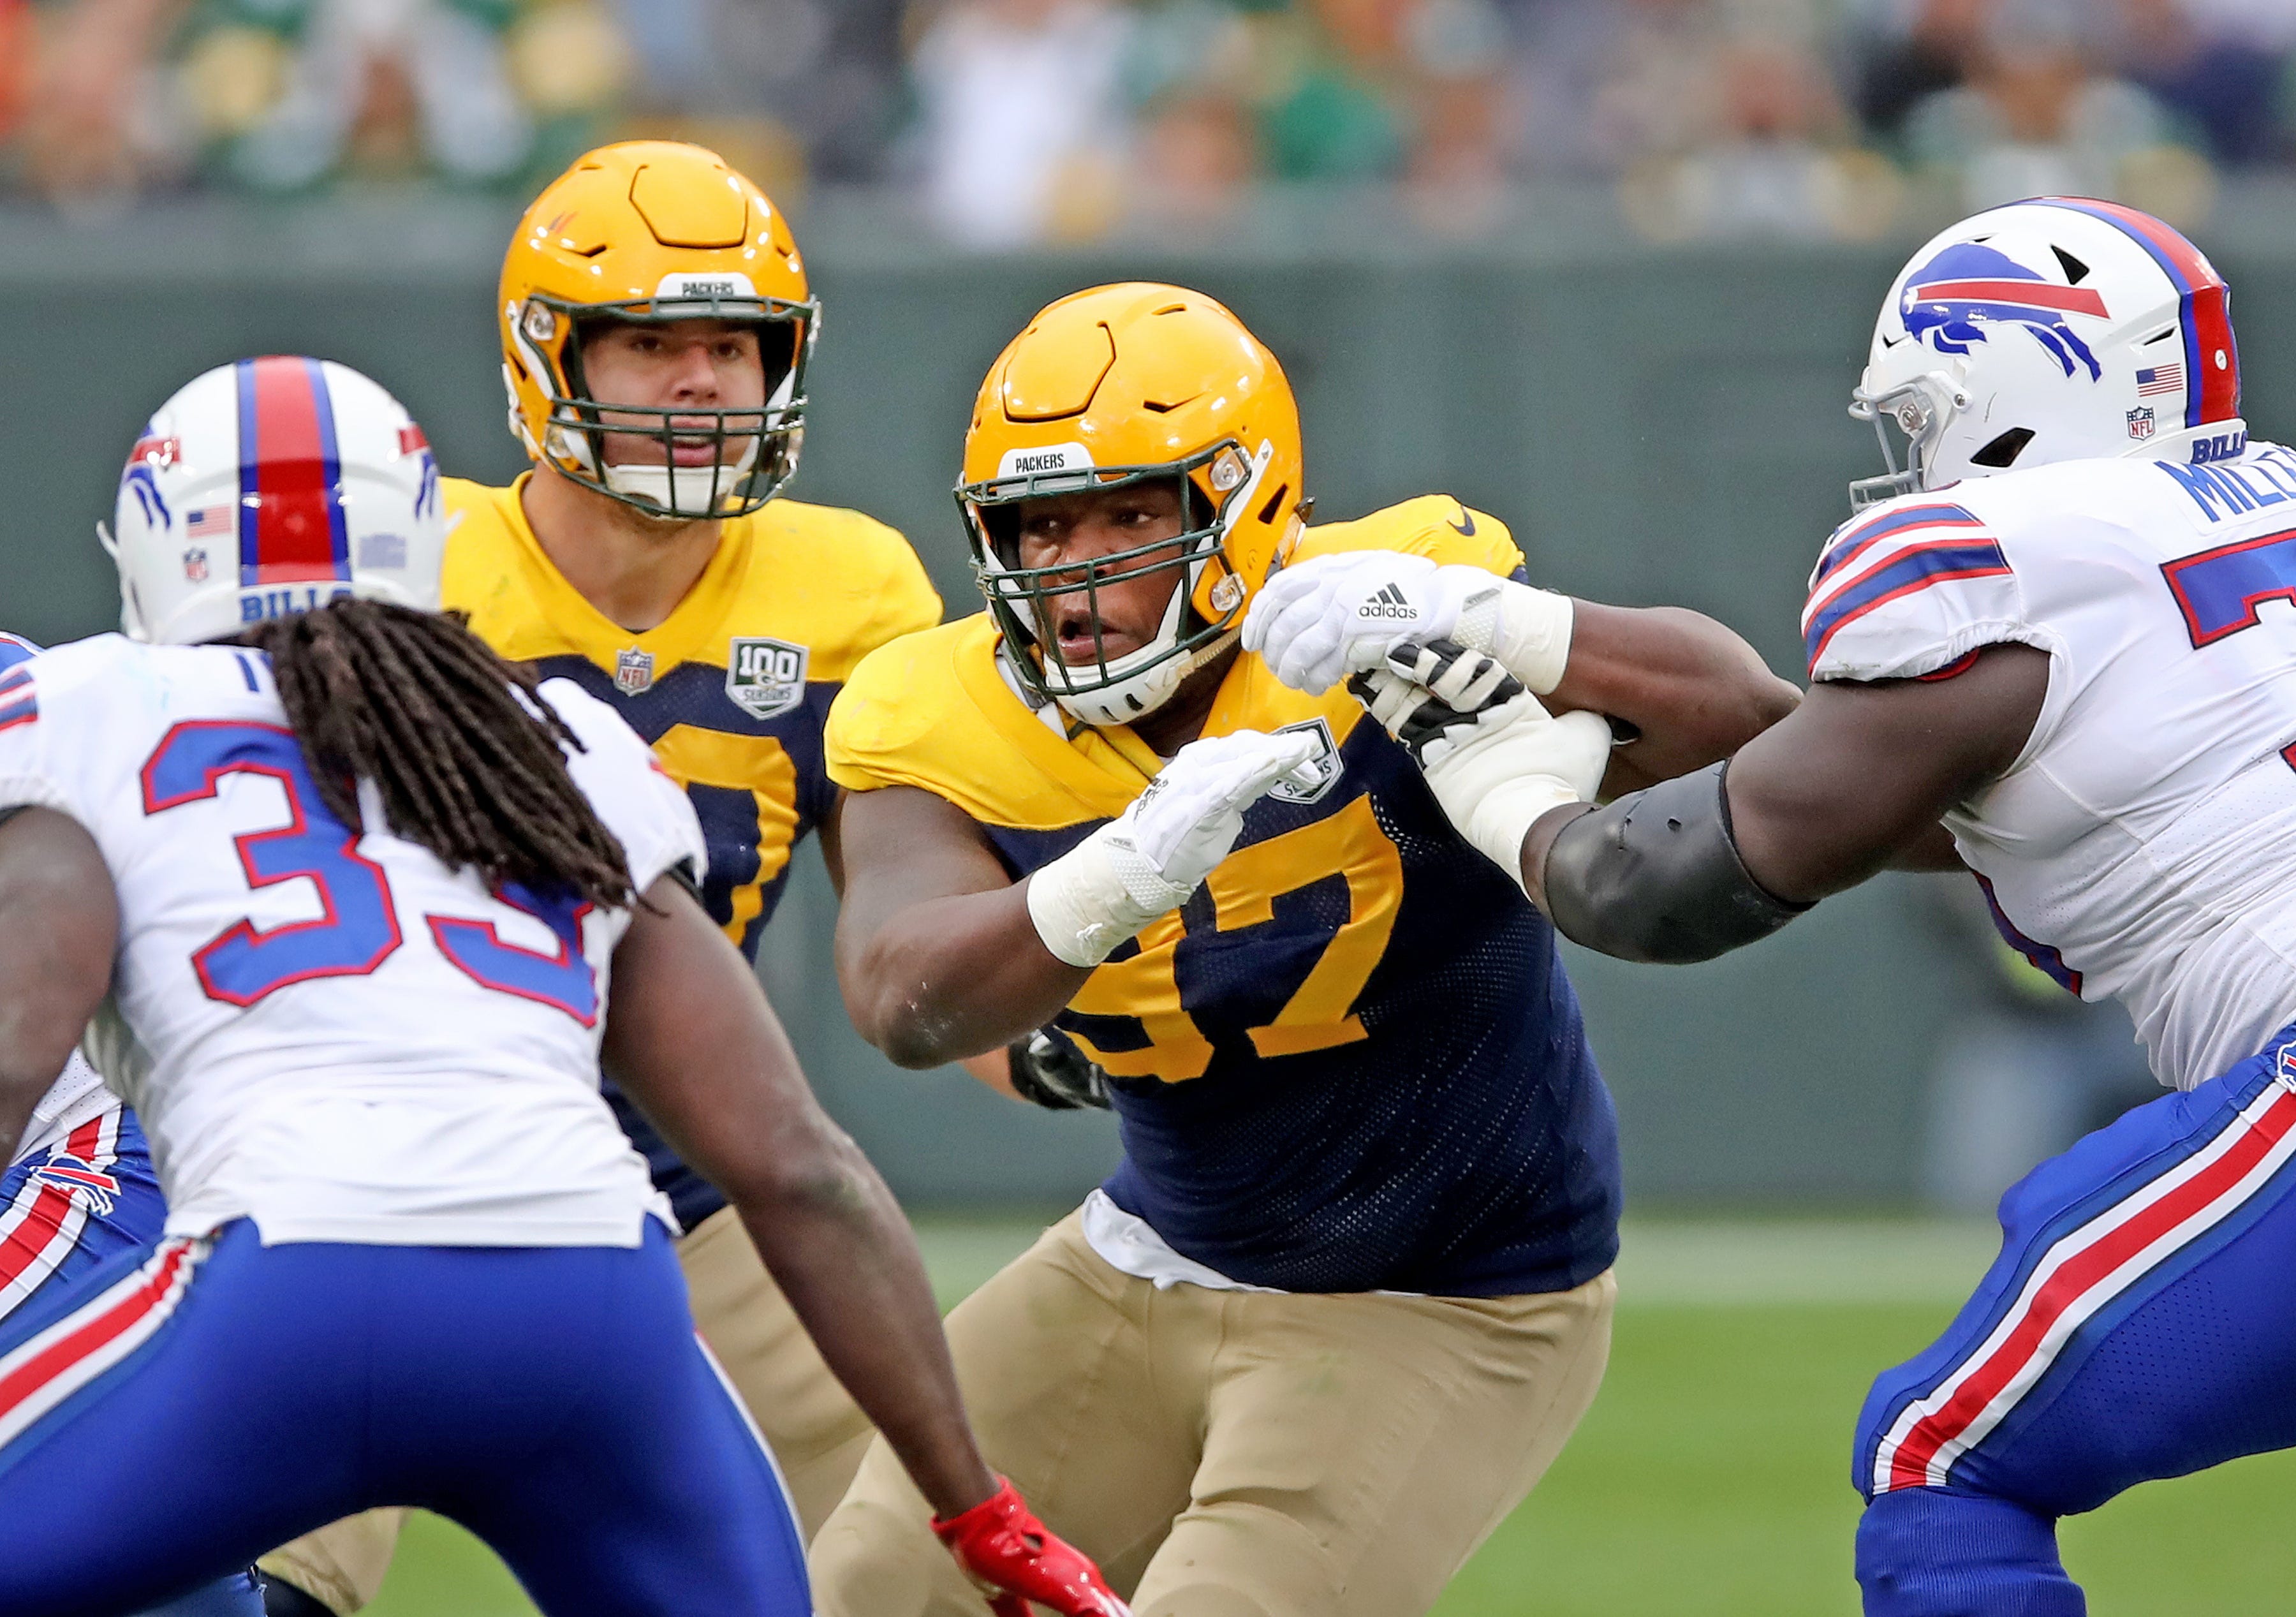 Green Bay Packers nose tackle Kenny Clark (97) rushes against the Buffalo Bills Sunday September 30, 2018 at Lambeau Field in Green Bay, Wis.